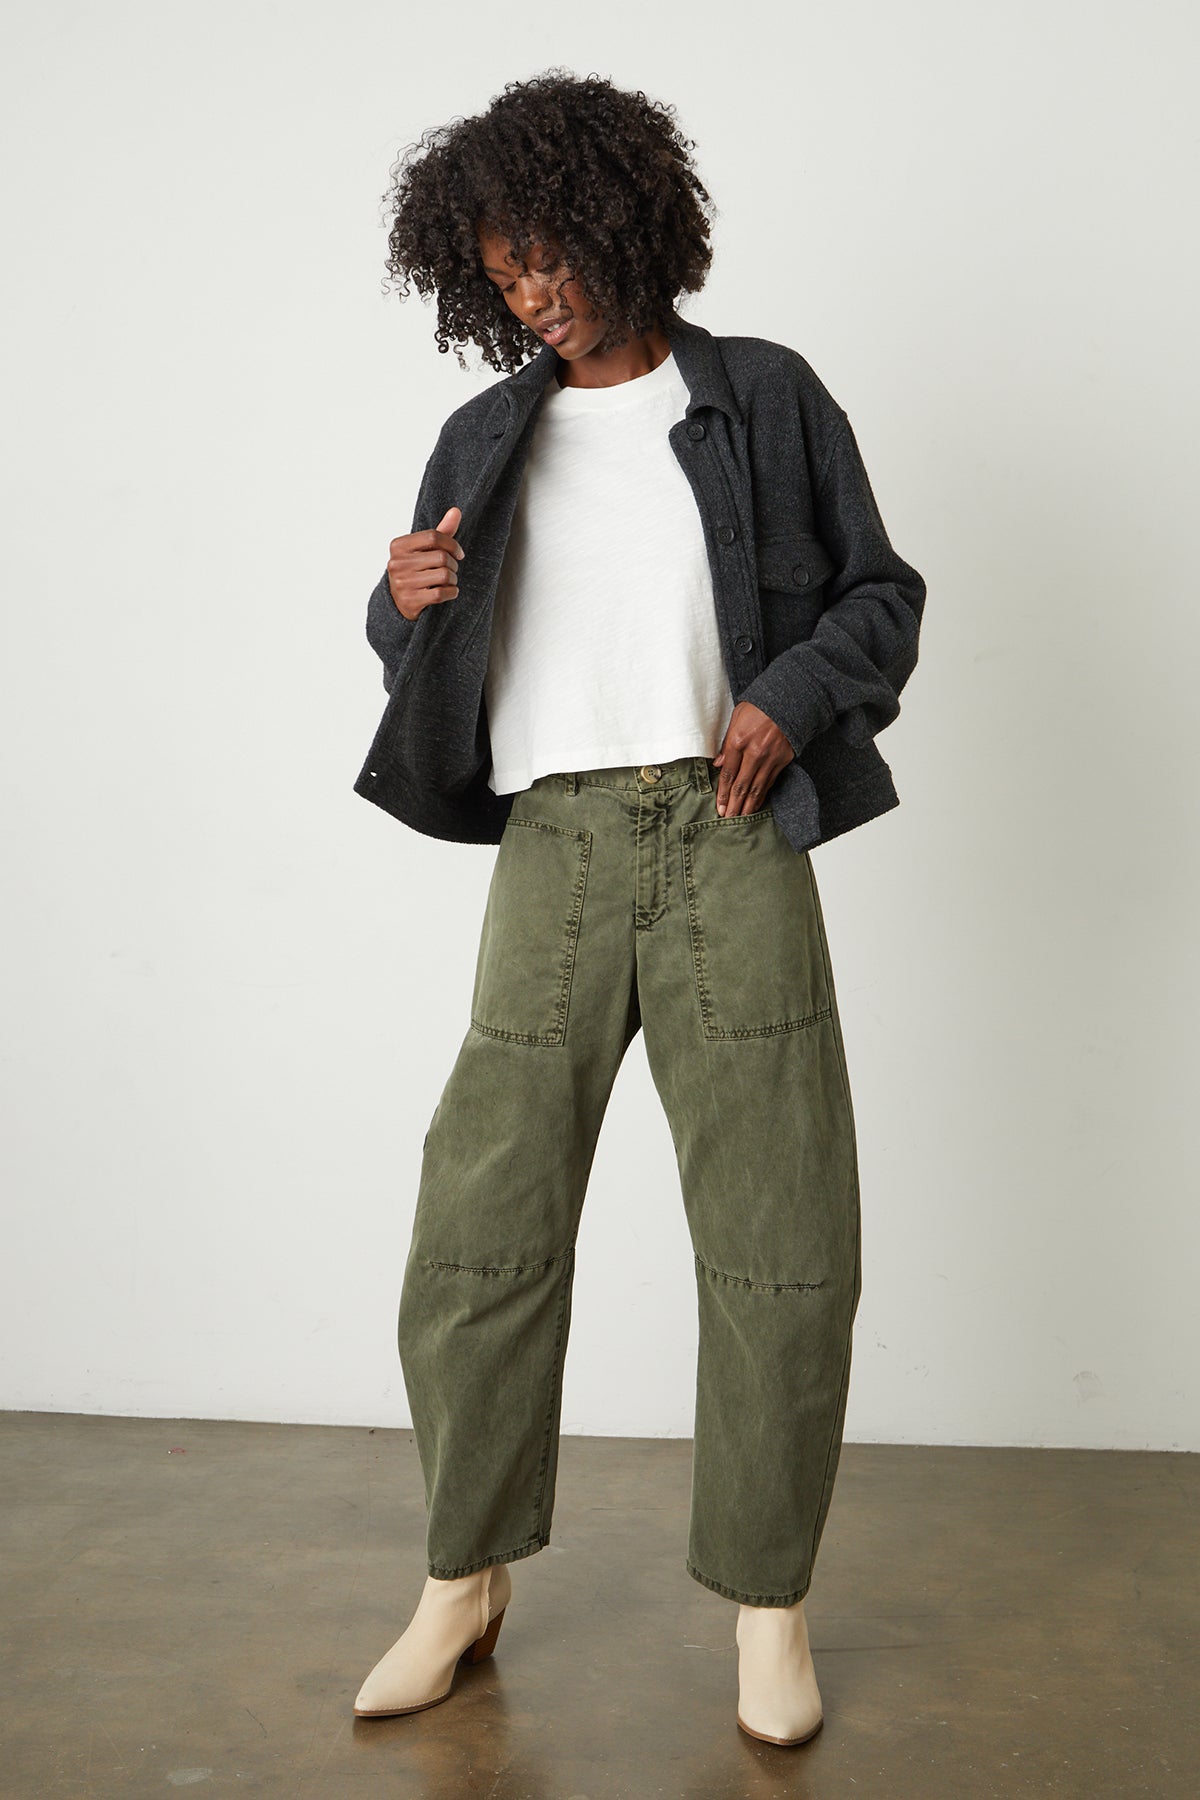   The model is wearing a pair of green cargo pants and a Velvet by Graham & Spencer KAMERON FLEECE SHACKET. 